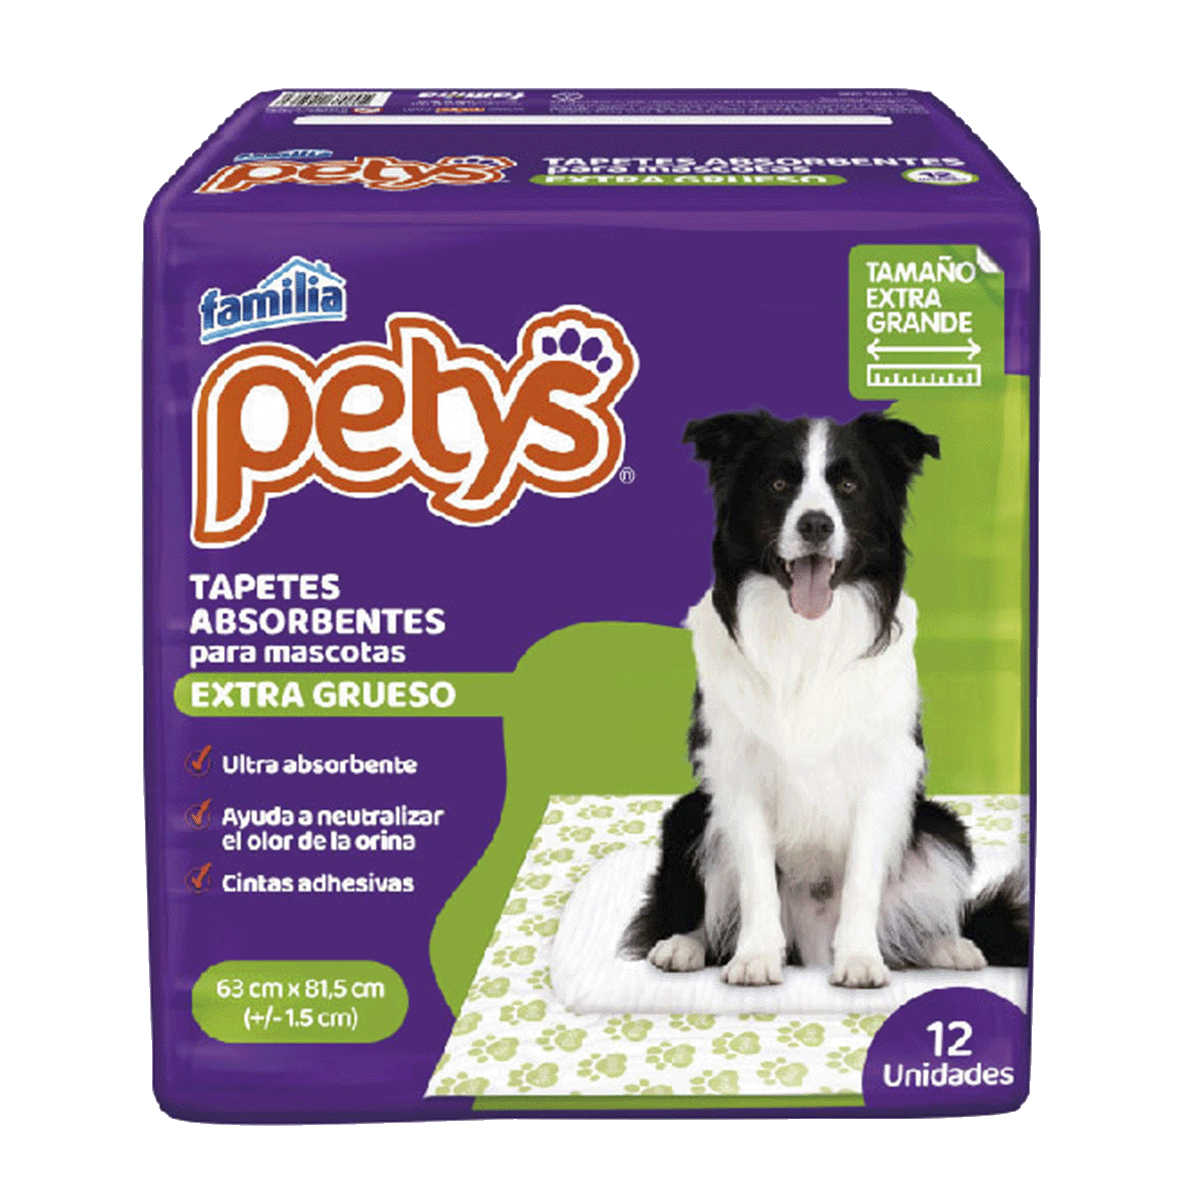 Imagen Tapetes Absorbentes Petys Extra-Grueso x 12 und 1